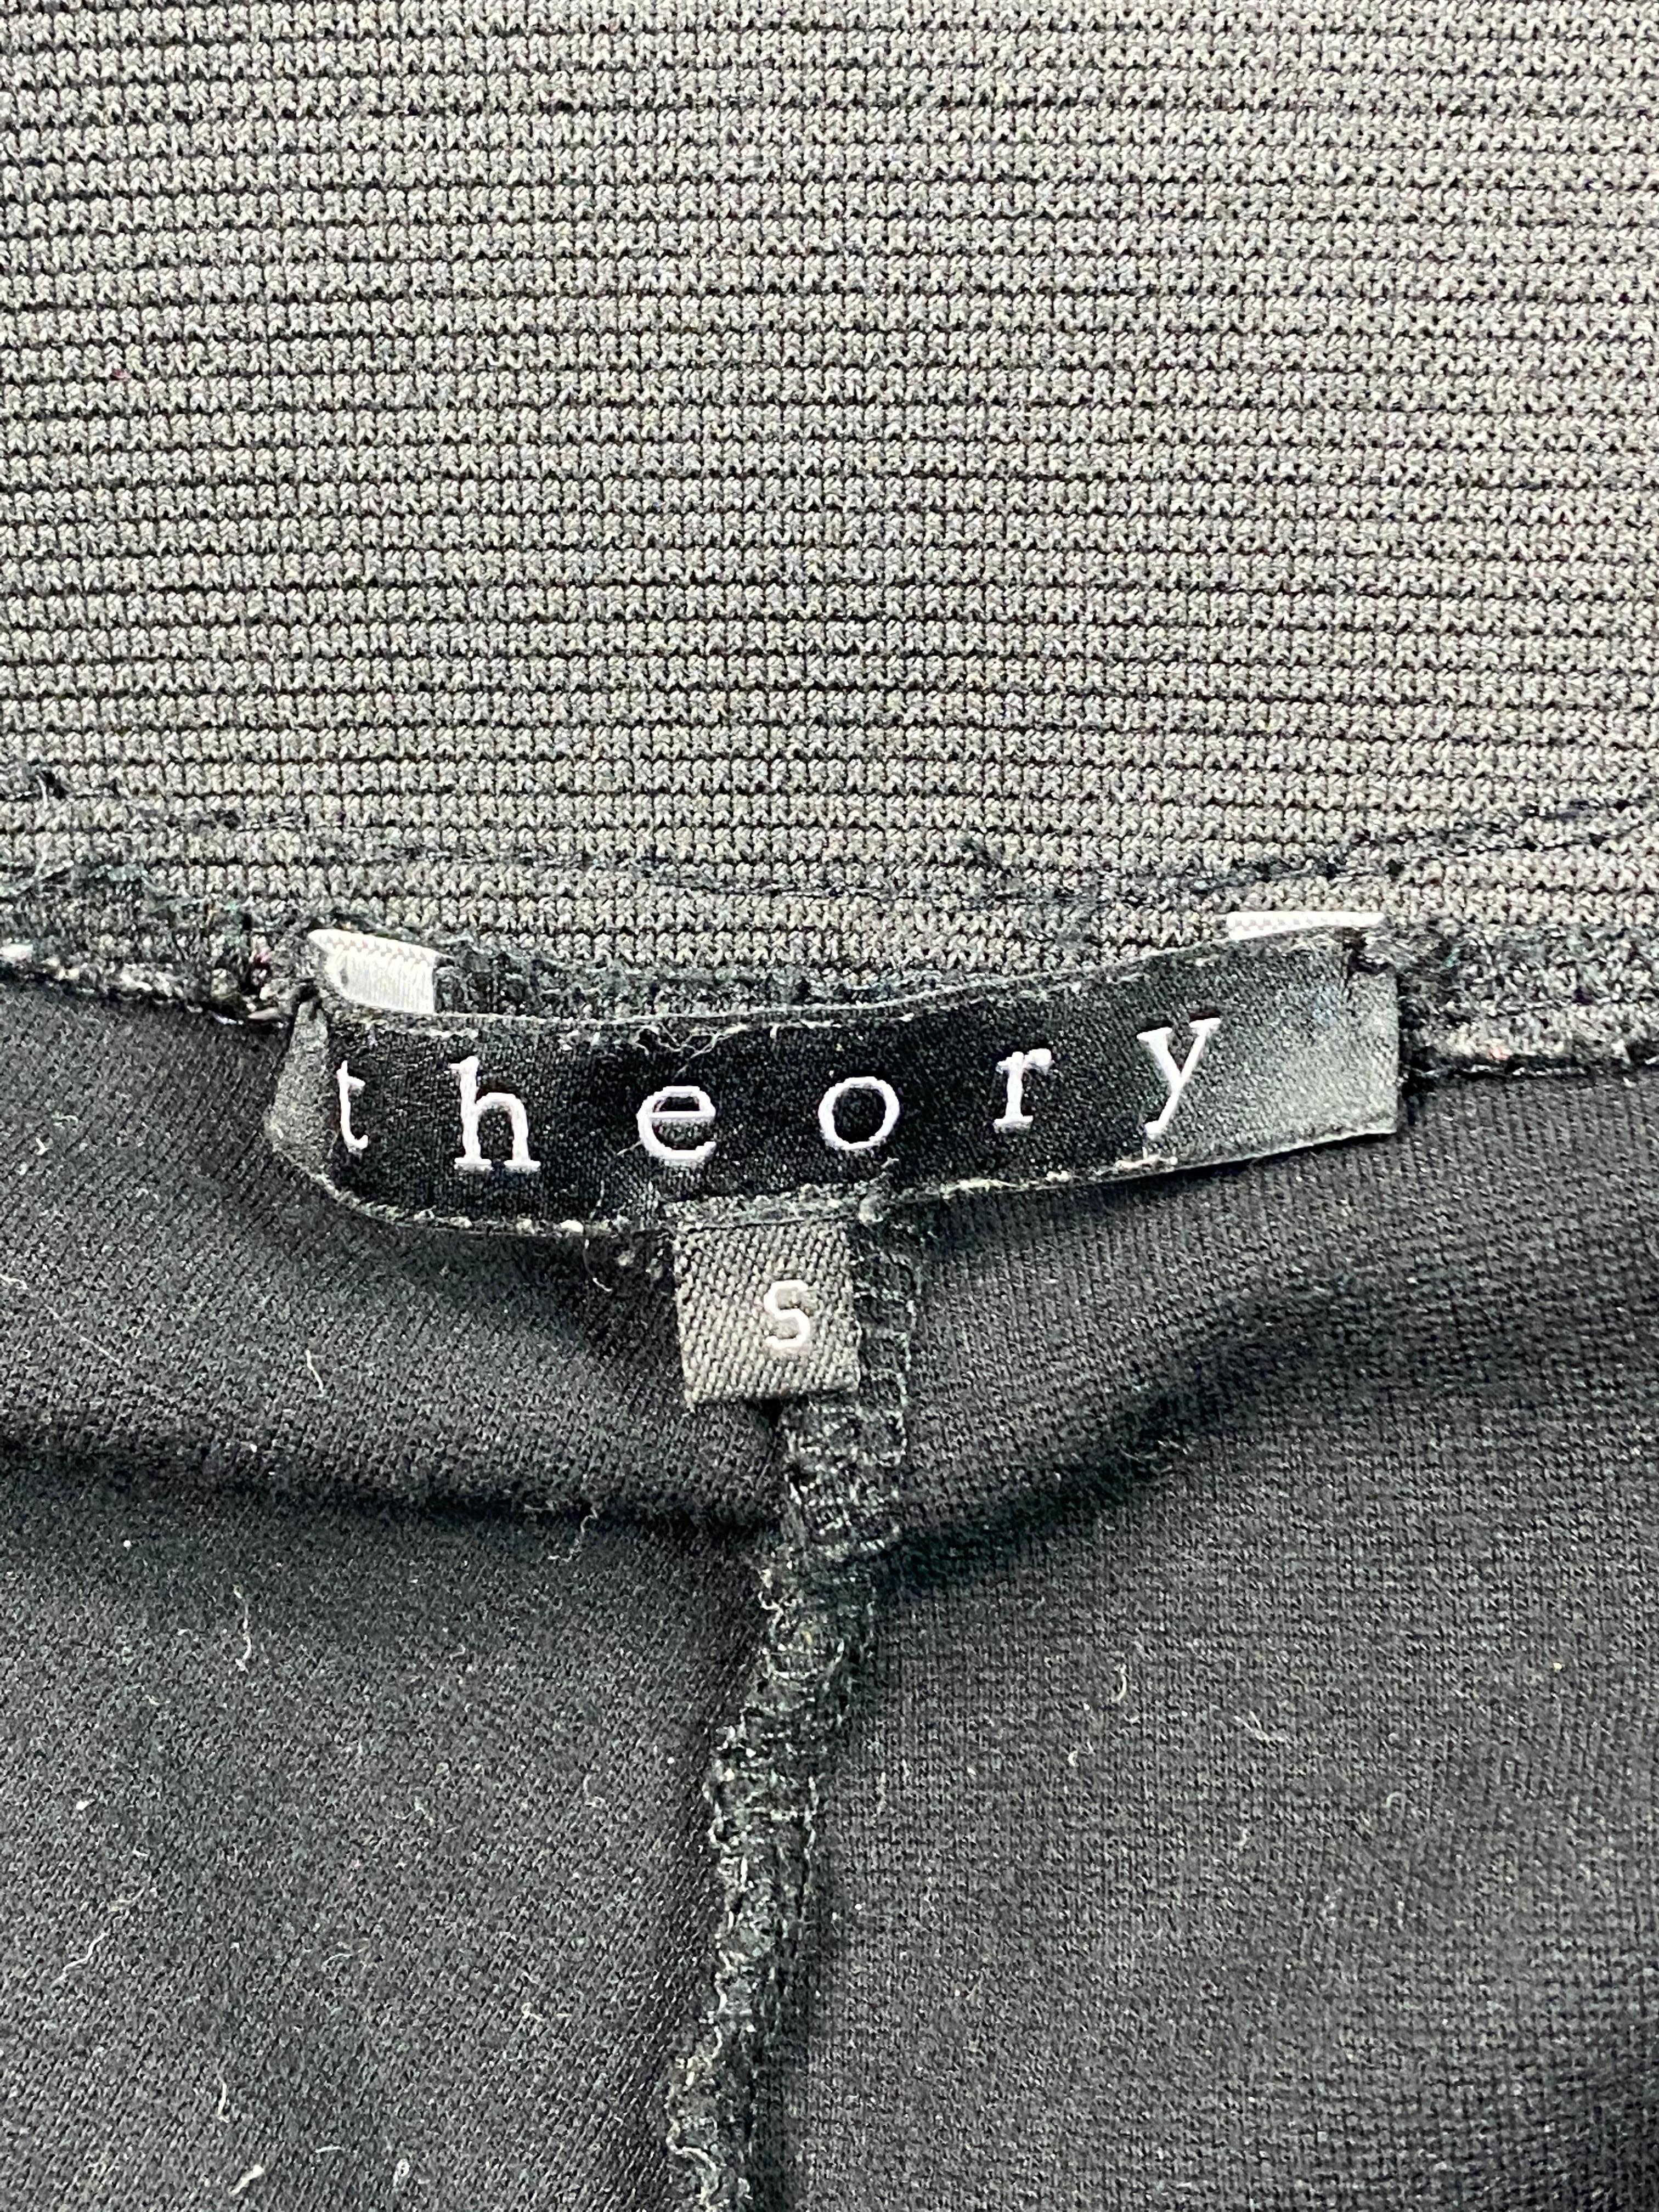 Theory Black Leggings Pants, Size Small In Good Condition For Sale In Beverly Hills, CA